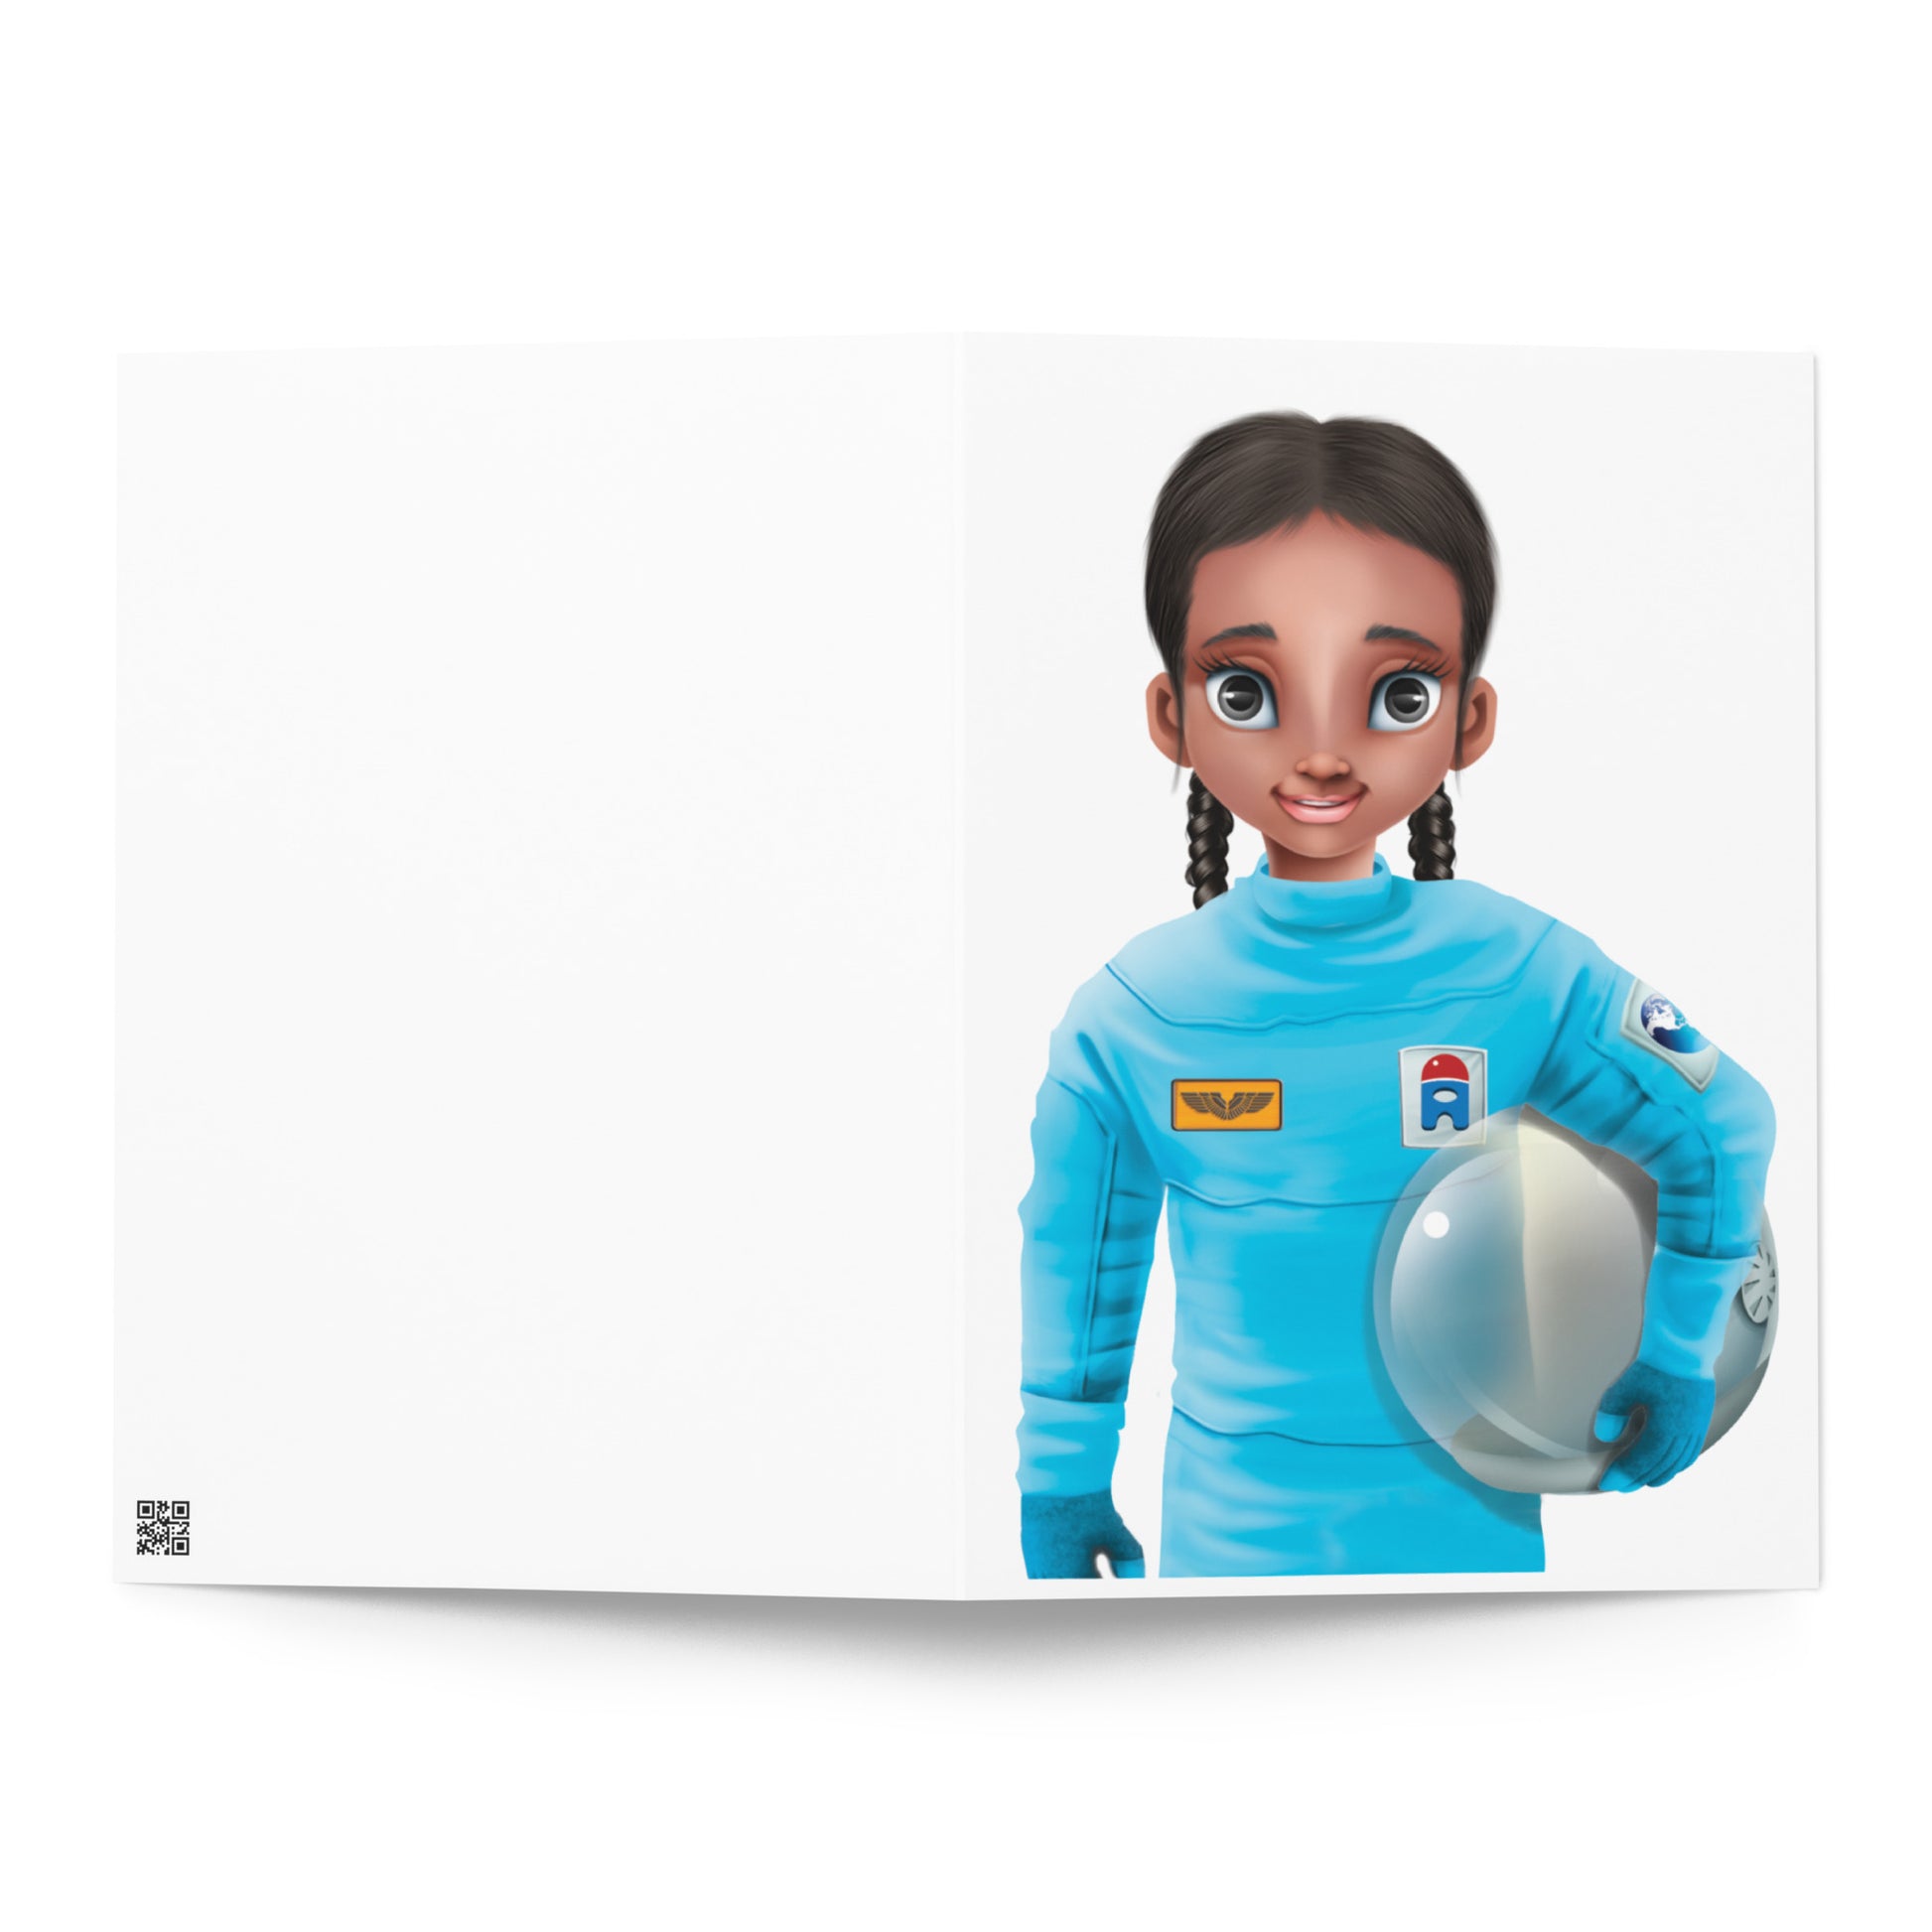 The best inspirational graduation card for a future female astronaut, space or STEM worker.